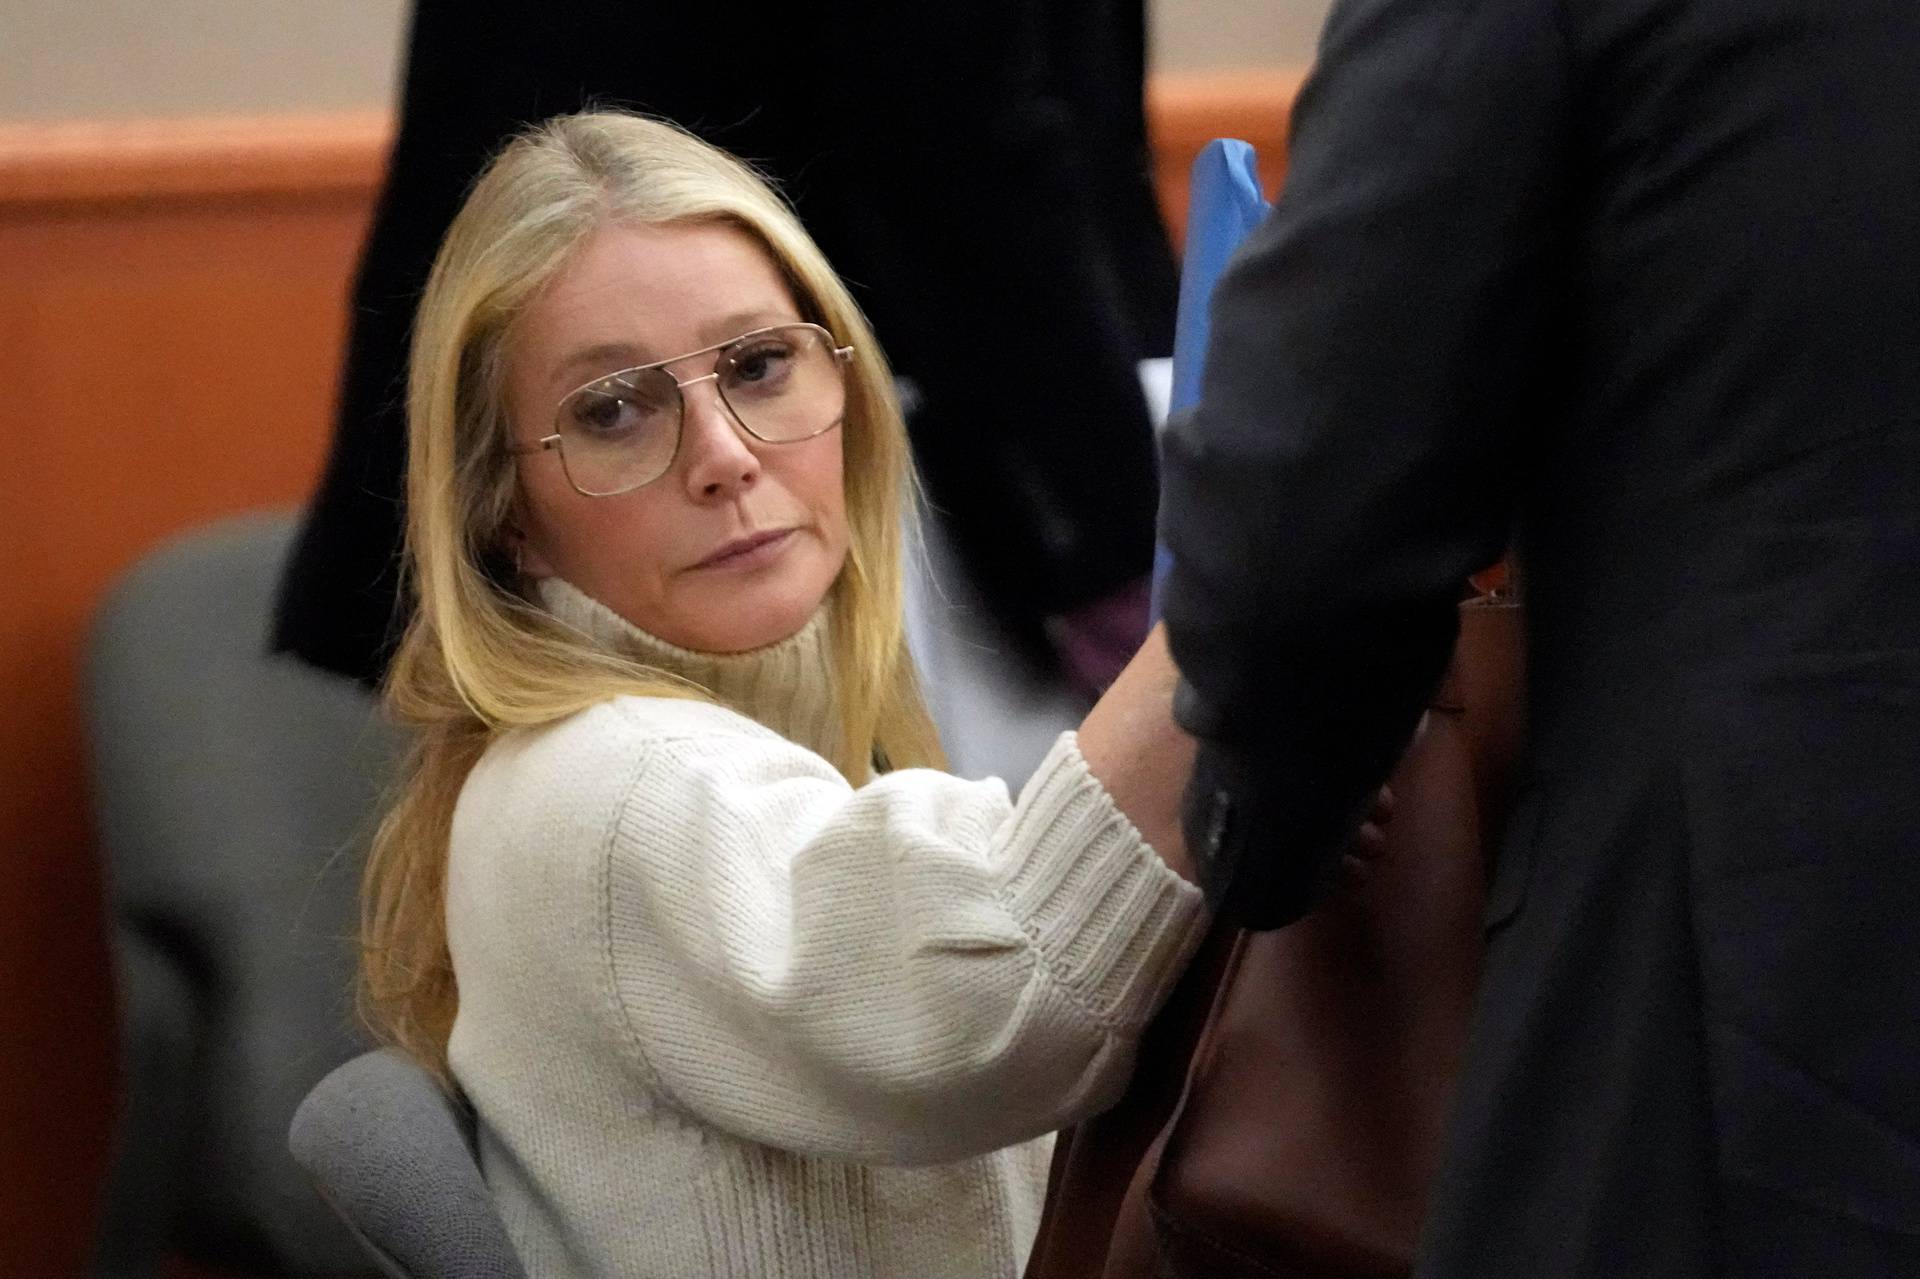 Actor Gwyneth Paltrow looks on before leaving the courtroom in Park City, Utah